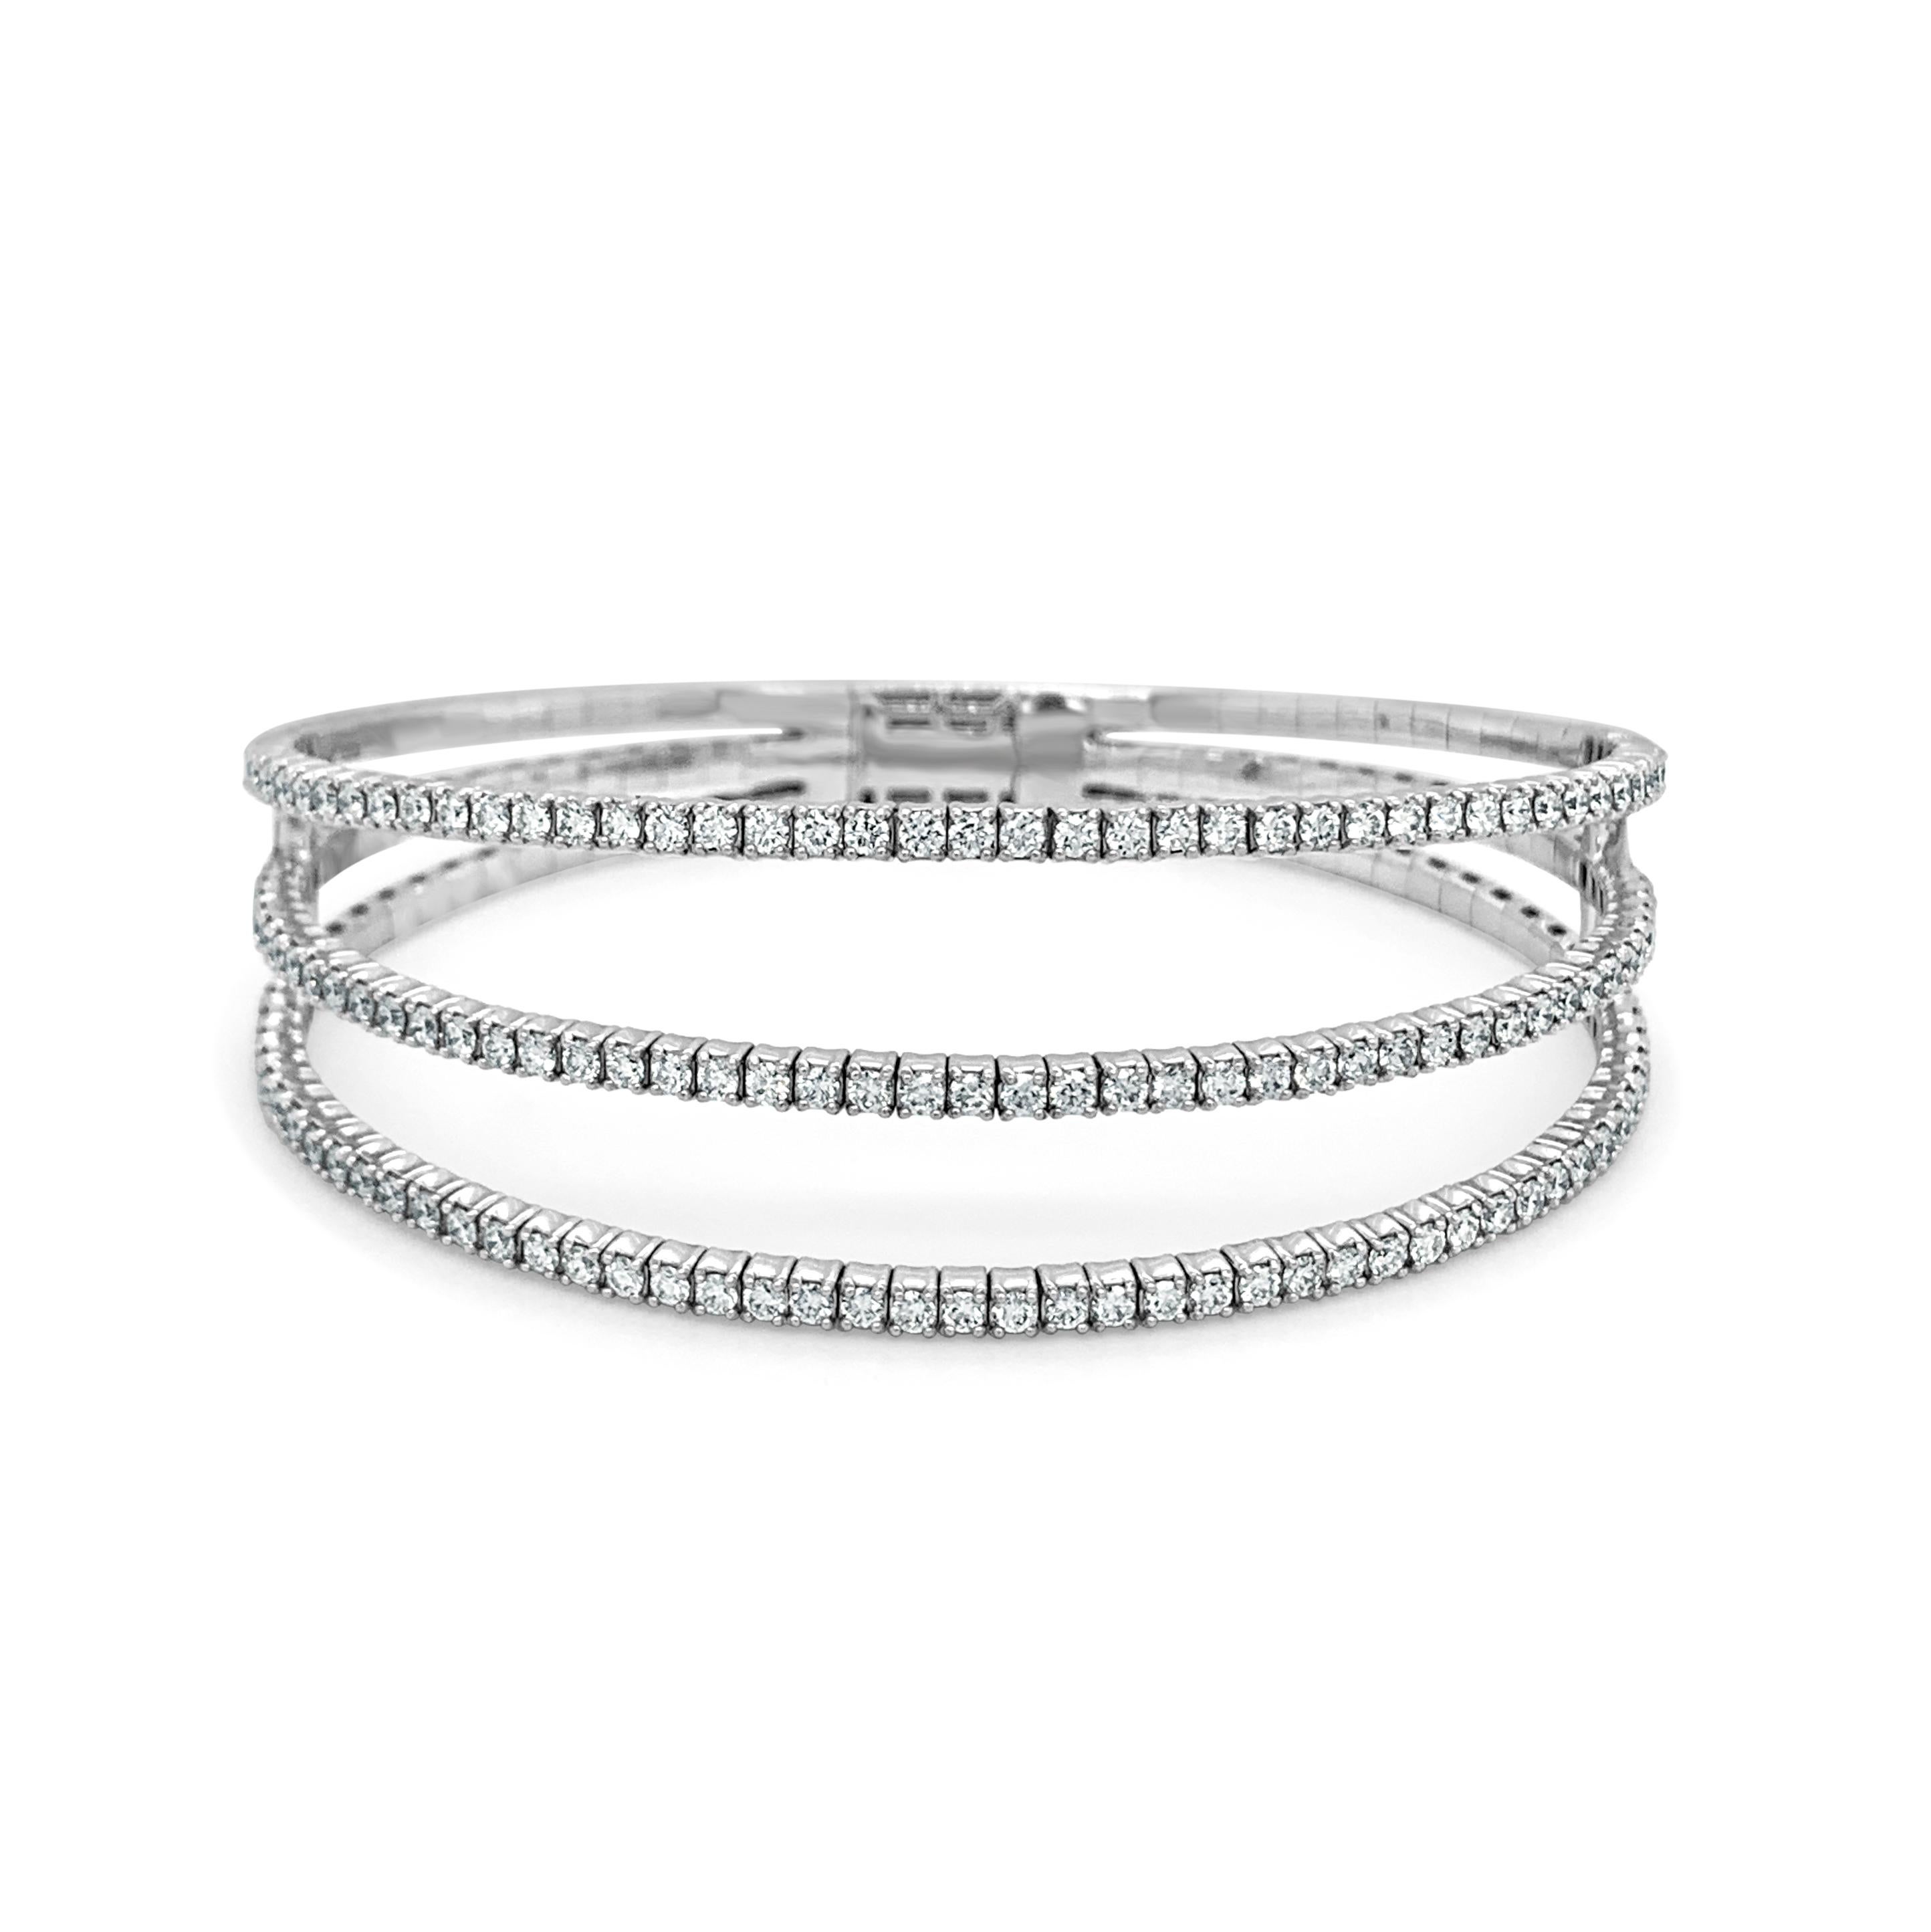 This Stunning and Striking flexible triple row bangle will be sure to add a statement to your look! Crafted of 14K Gold this bangle features 2.85 carats of Natural Round White Diamonds. 7